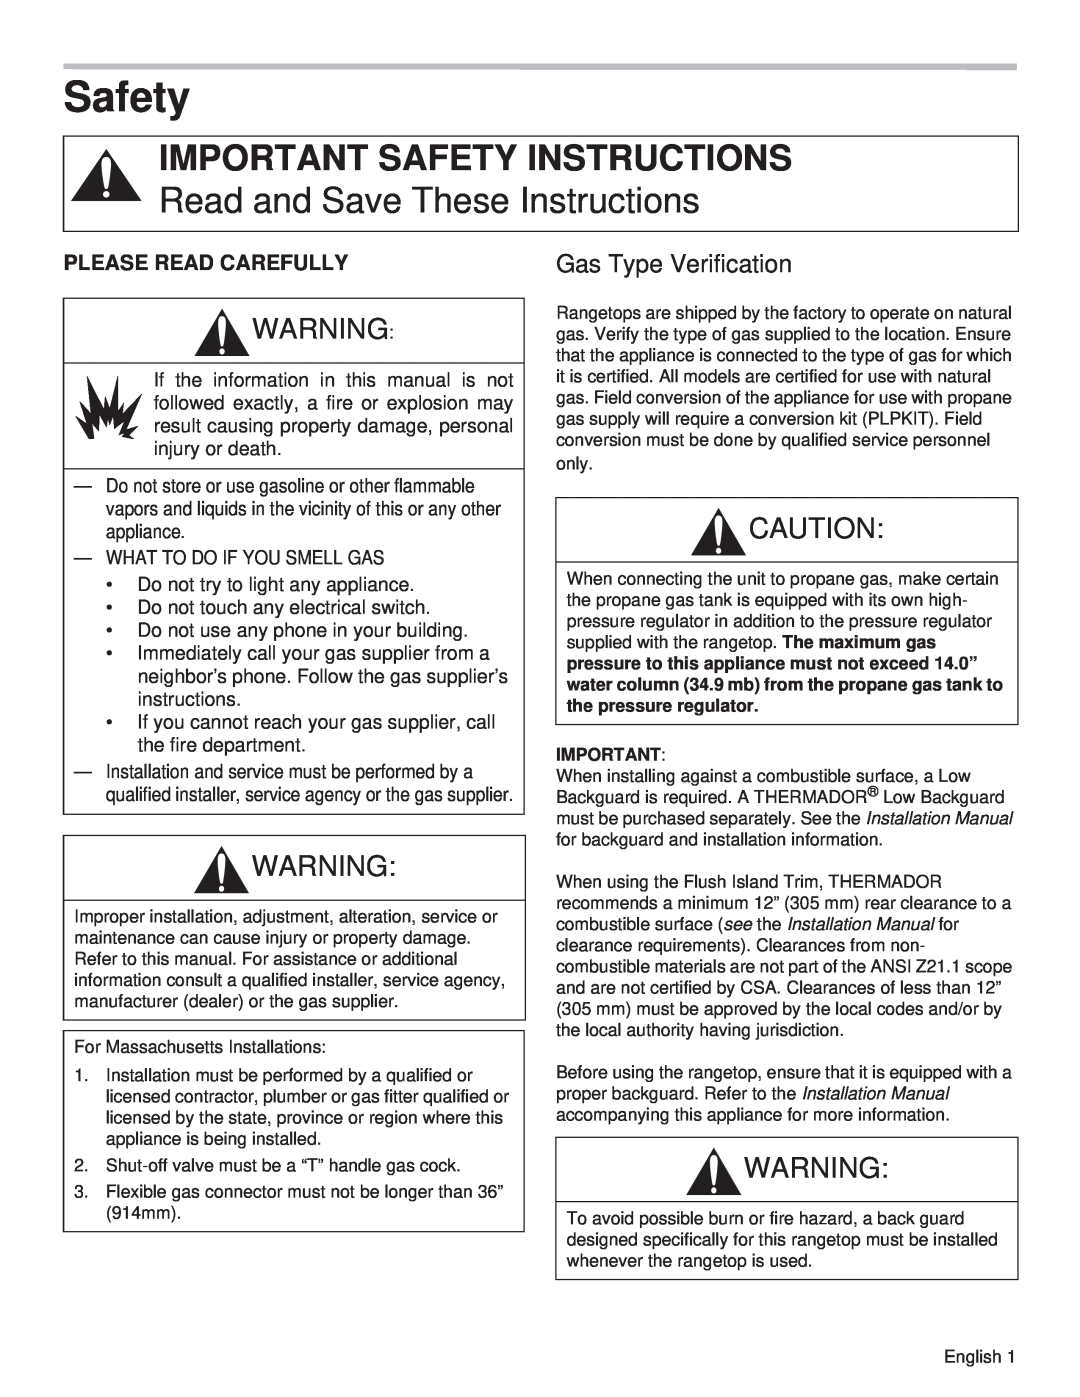 Thermador PCG36, PCG48, PCG30 Important Safety Instructions, Read and Save These Instructions, Please Read Carefully 